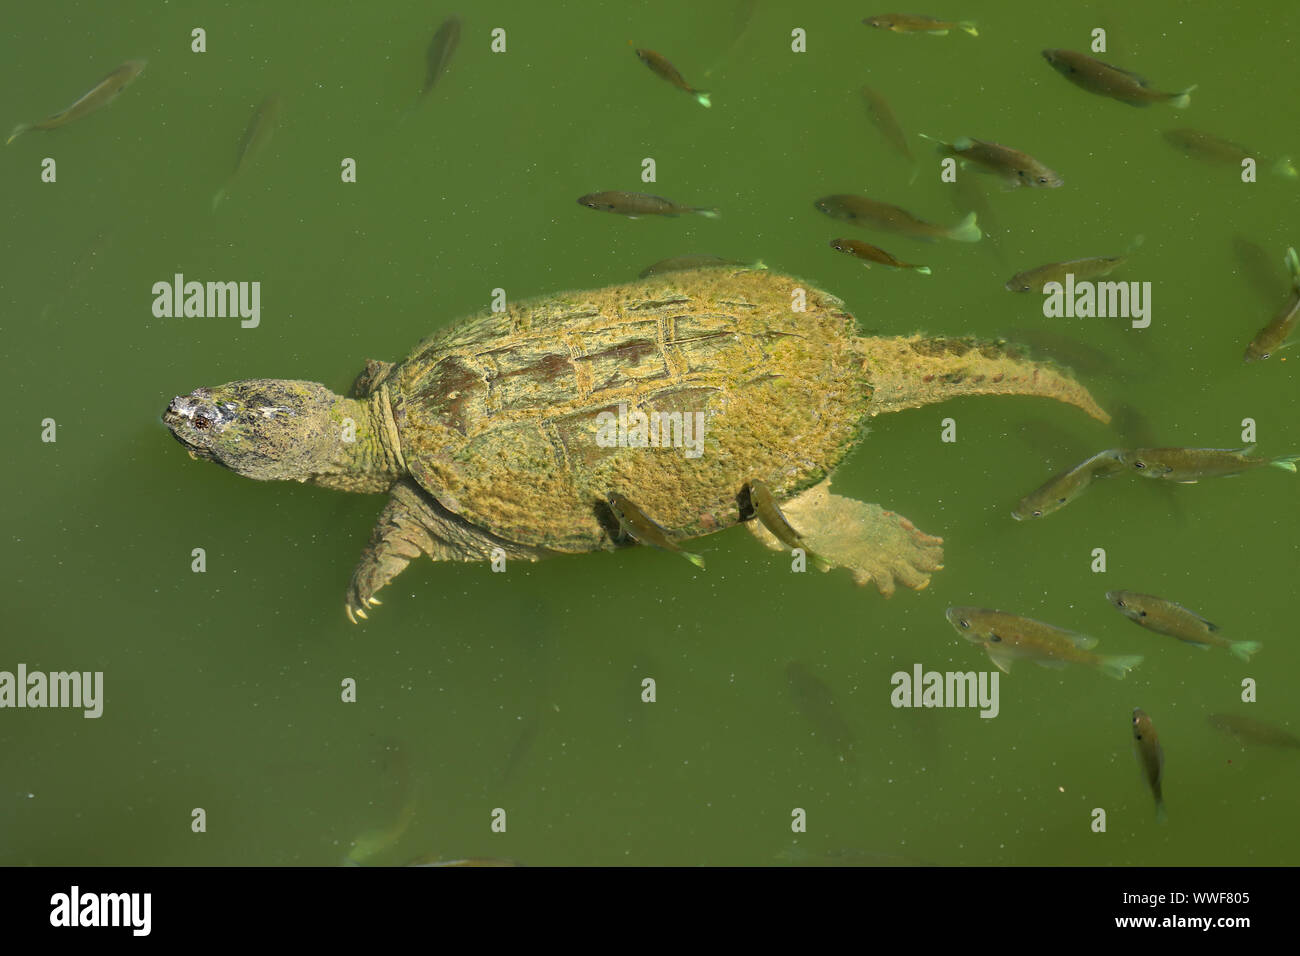 snapping turtle, Chelydra serpentina, and bluegills, Lepomis macrochirus, bluegills attempting to feed on the algae on turtle's carapace, Maryland Stock Photo